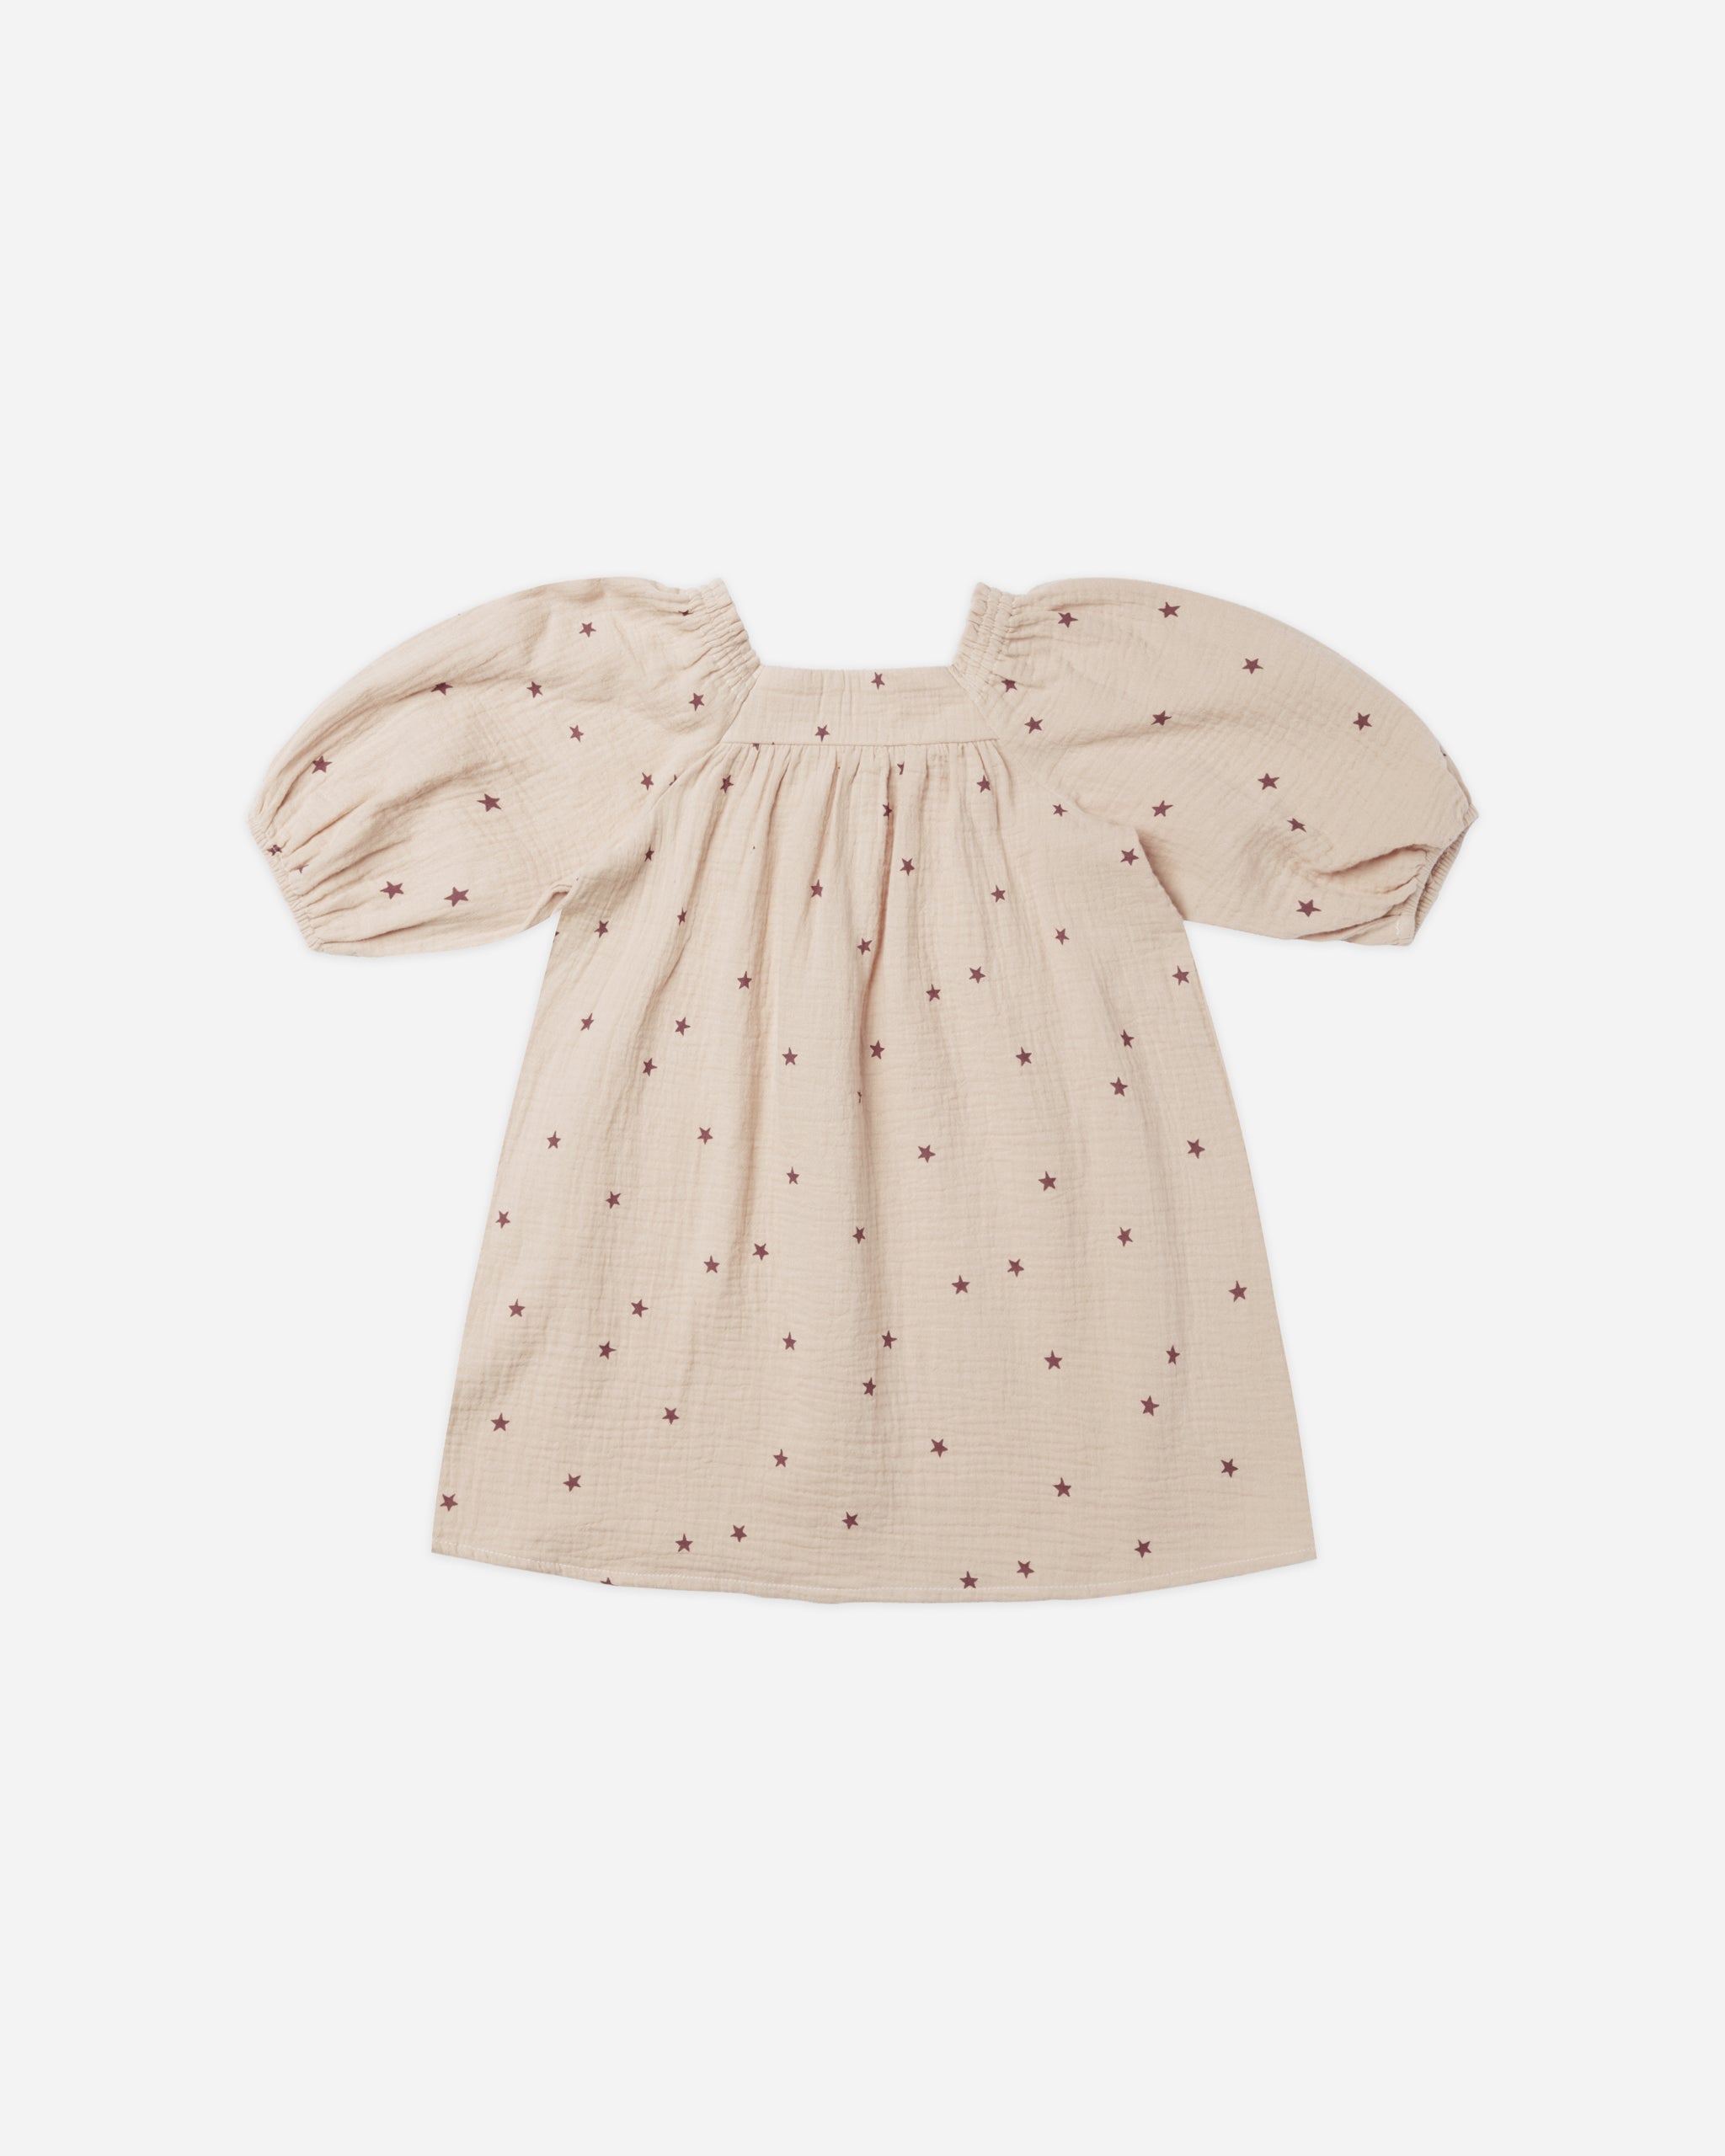 Talee Dress || Stars - Rylee + Cru | Kids Clothes | Trendy Baby Clothes | Modern Infant Outfits |